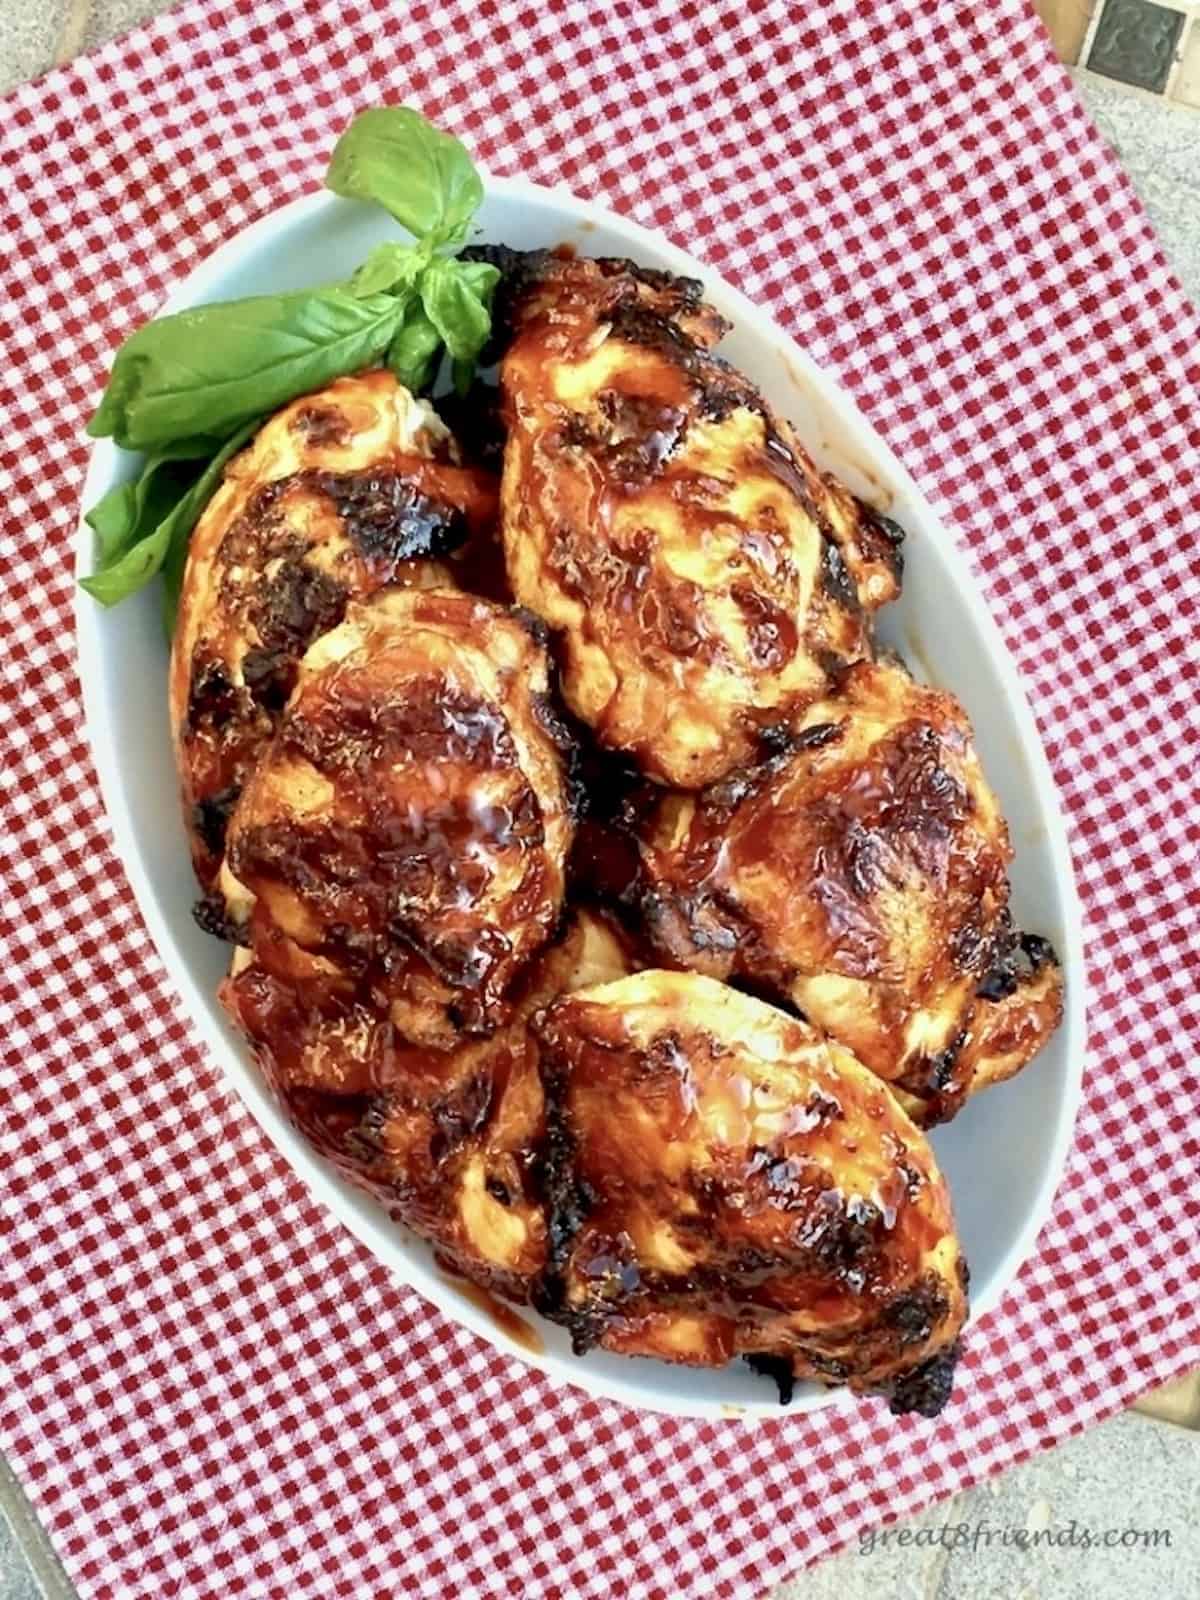 Barbecued Chicken pieces in an oval white dish sitting on a red and white gingham cloth with a basil leaf as garnish.